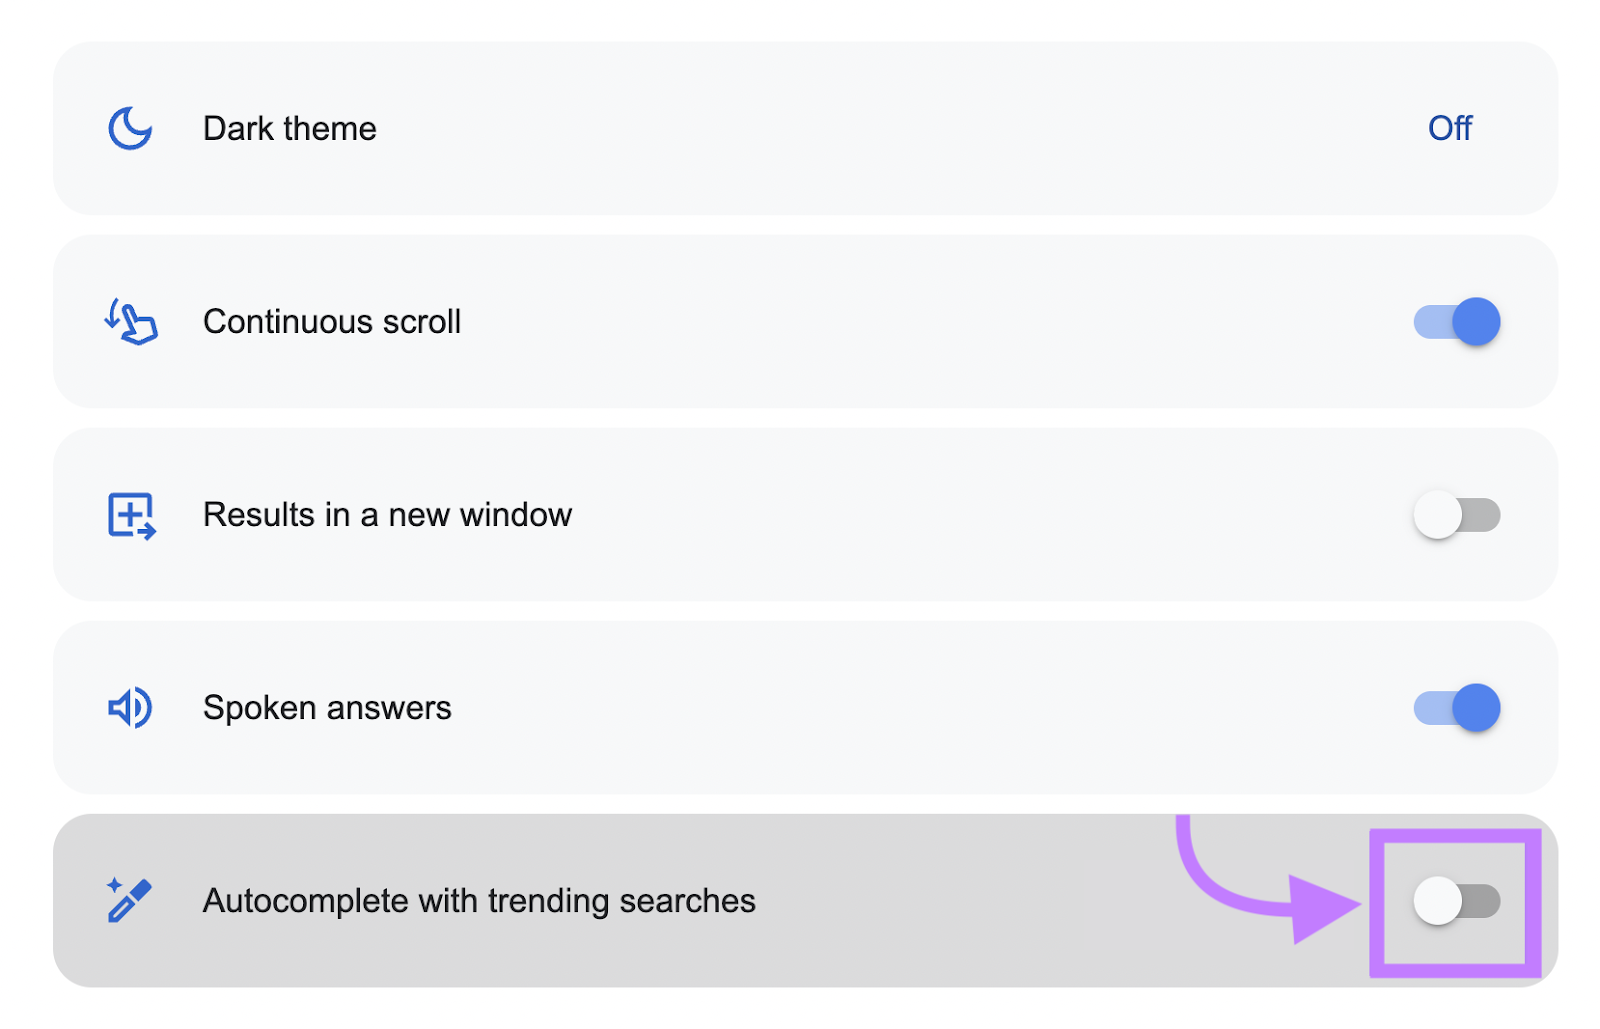 “Auto-complete with trending searches” switch